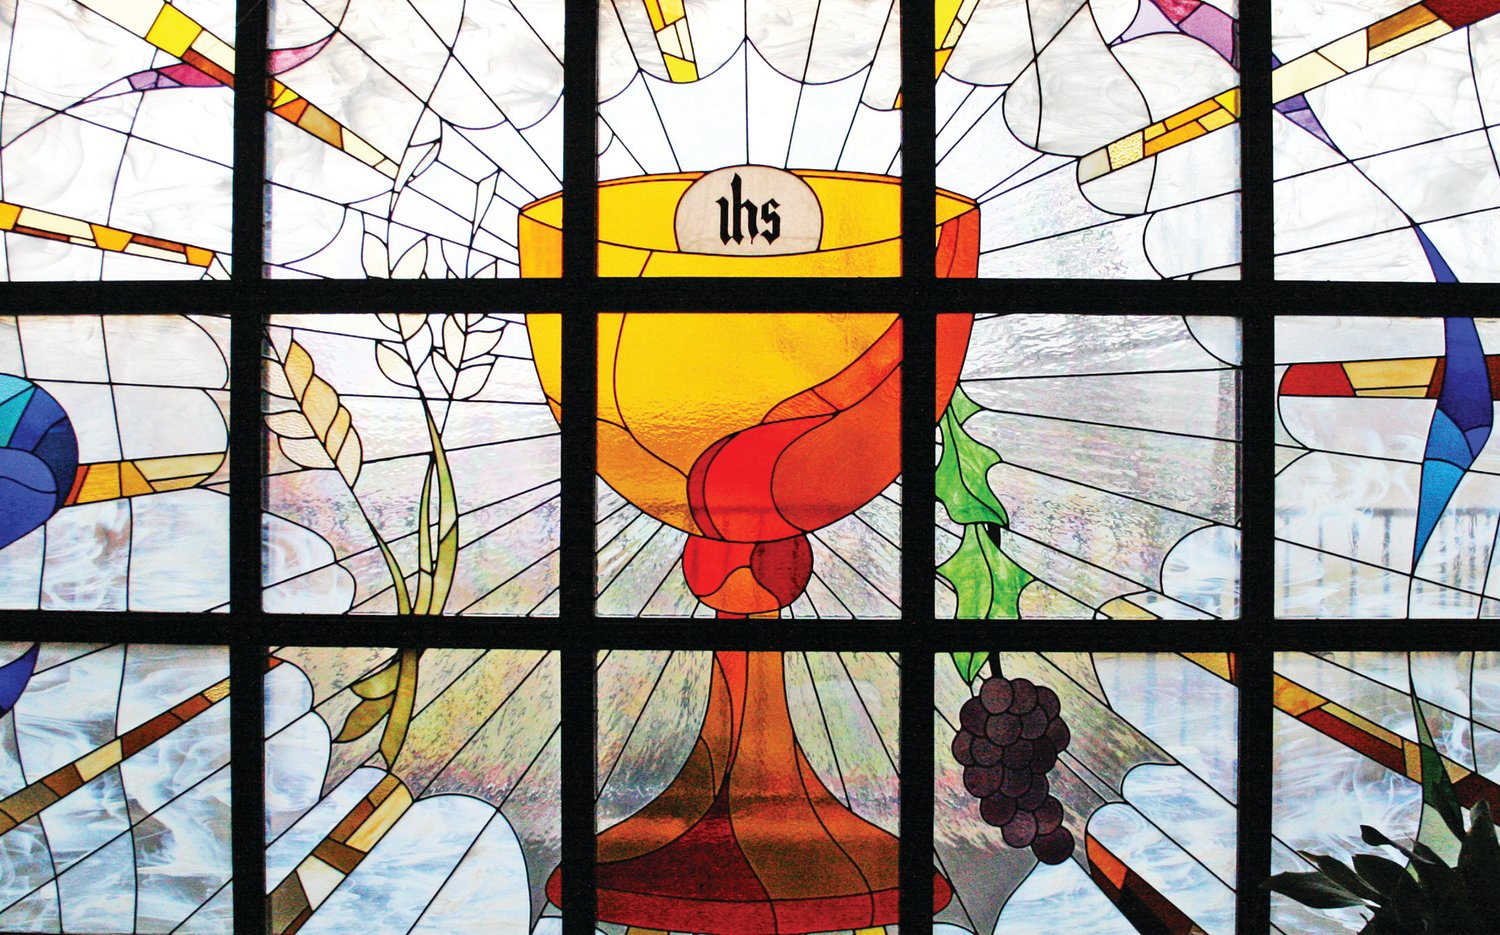 This magnificent art-glass window in St. Anthony Church in Camdenton depicts the Eucharist as the source and summit of the Christian life and the focal point of Christian community.